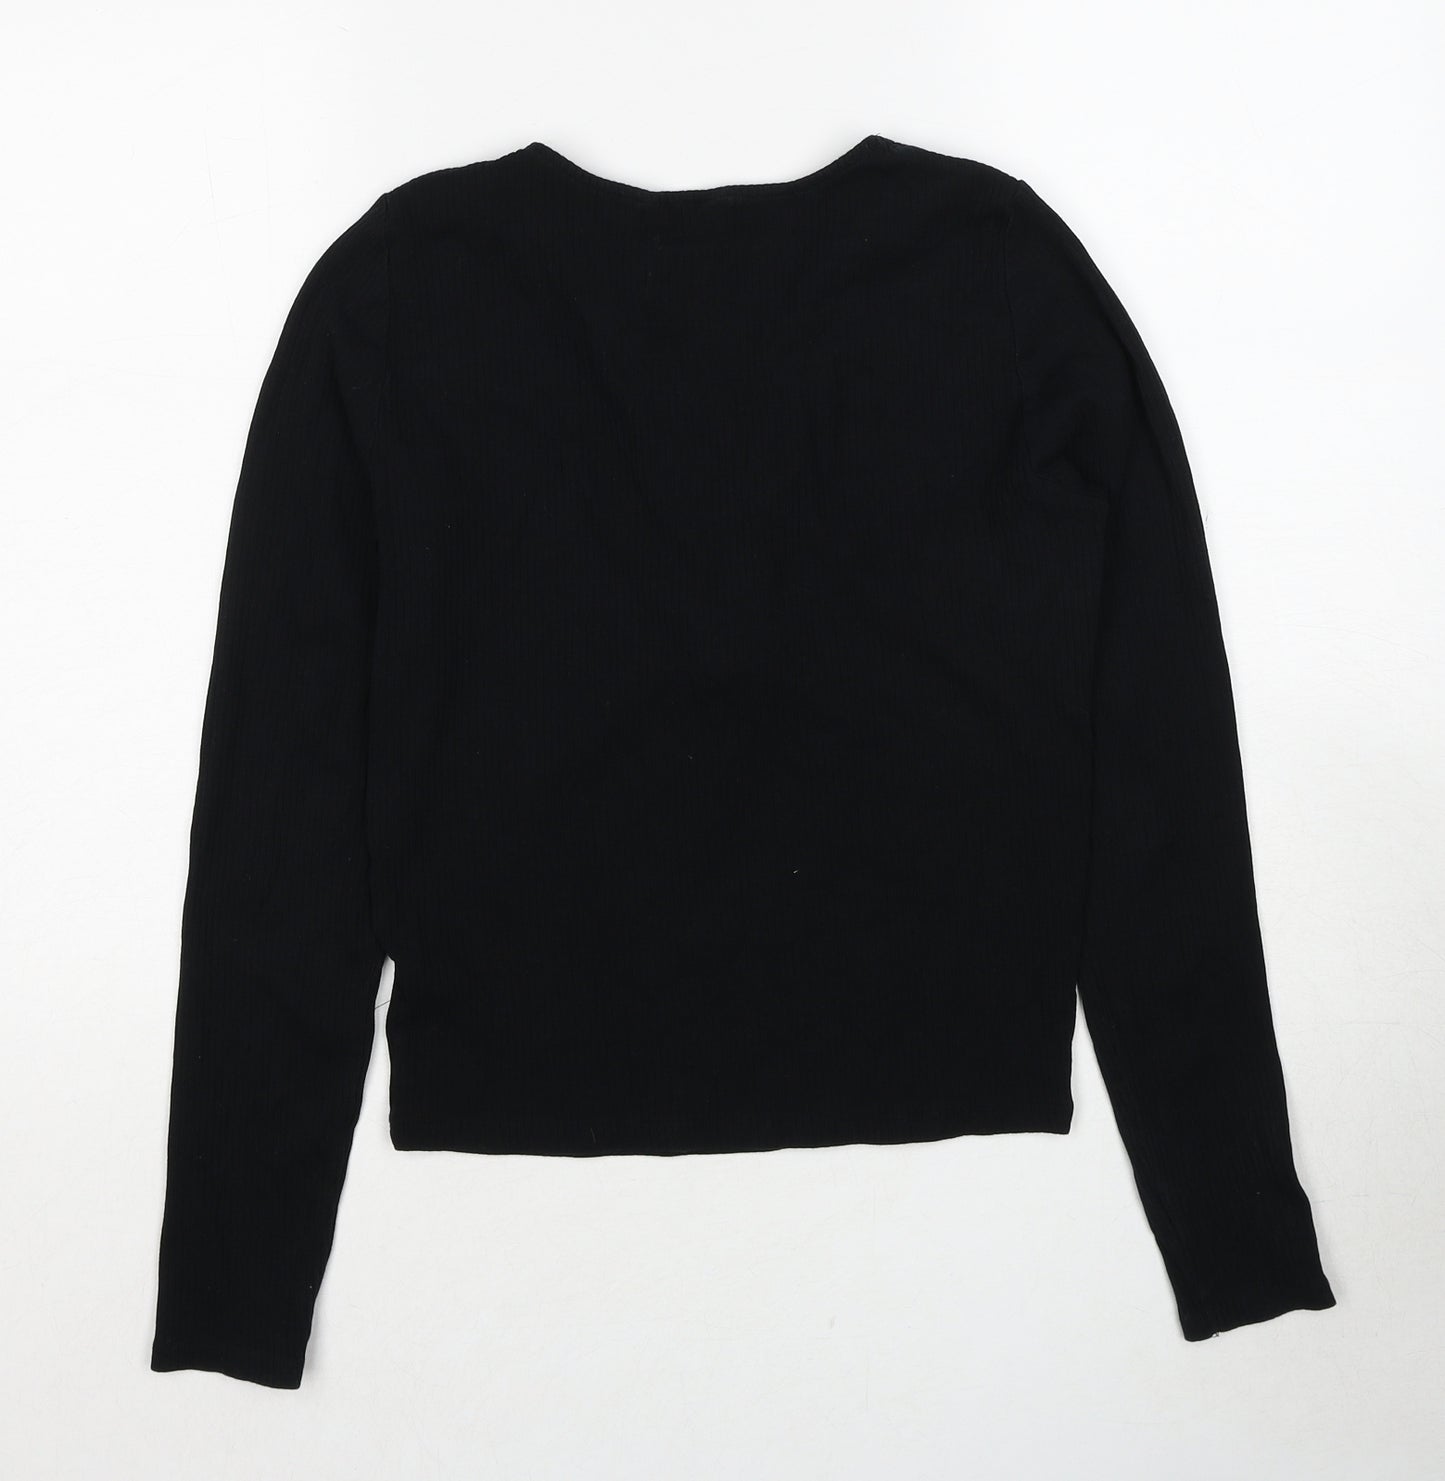 New Look Womens Black V-Neck Cotton Pullover Jumper Size 16